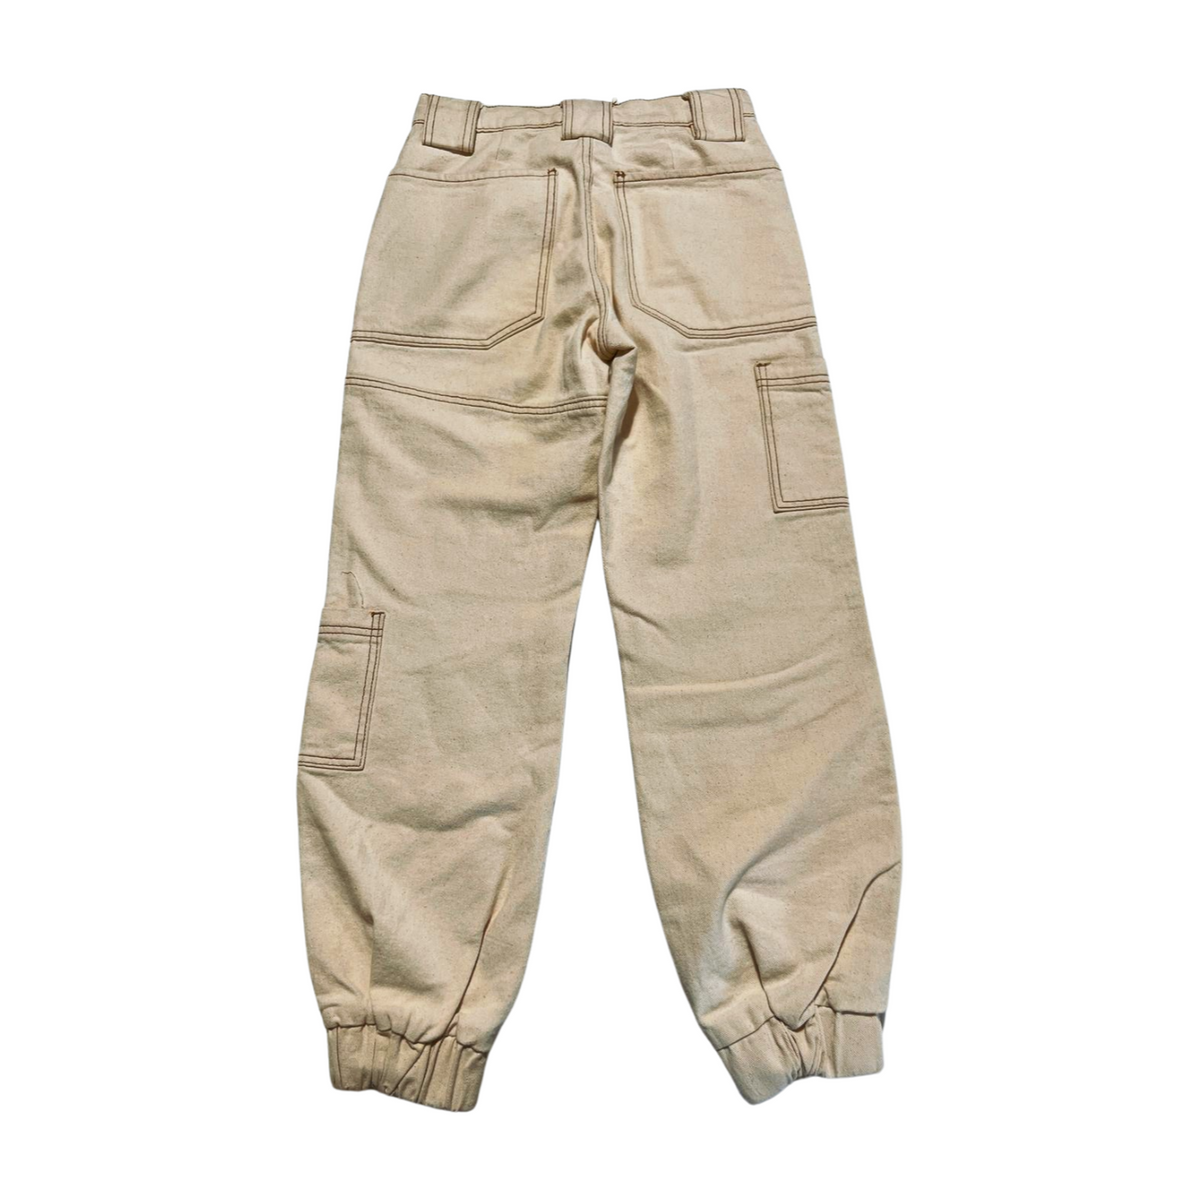 Urban Outfitters- Cream Cargo Jeans